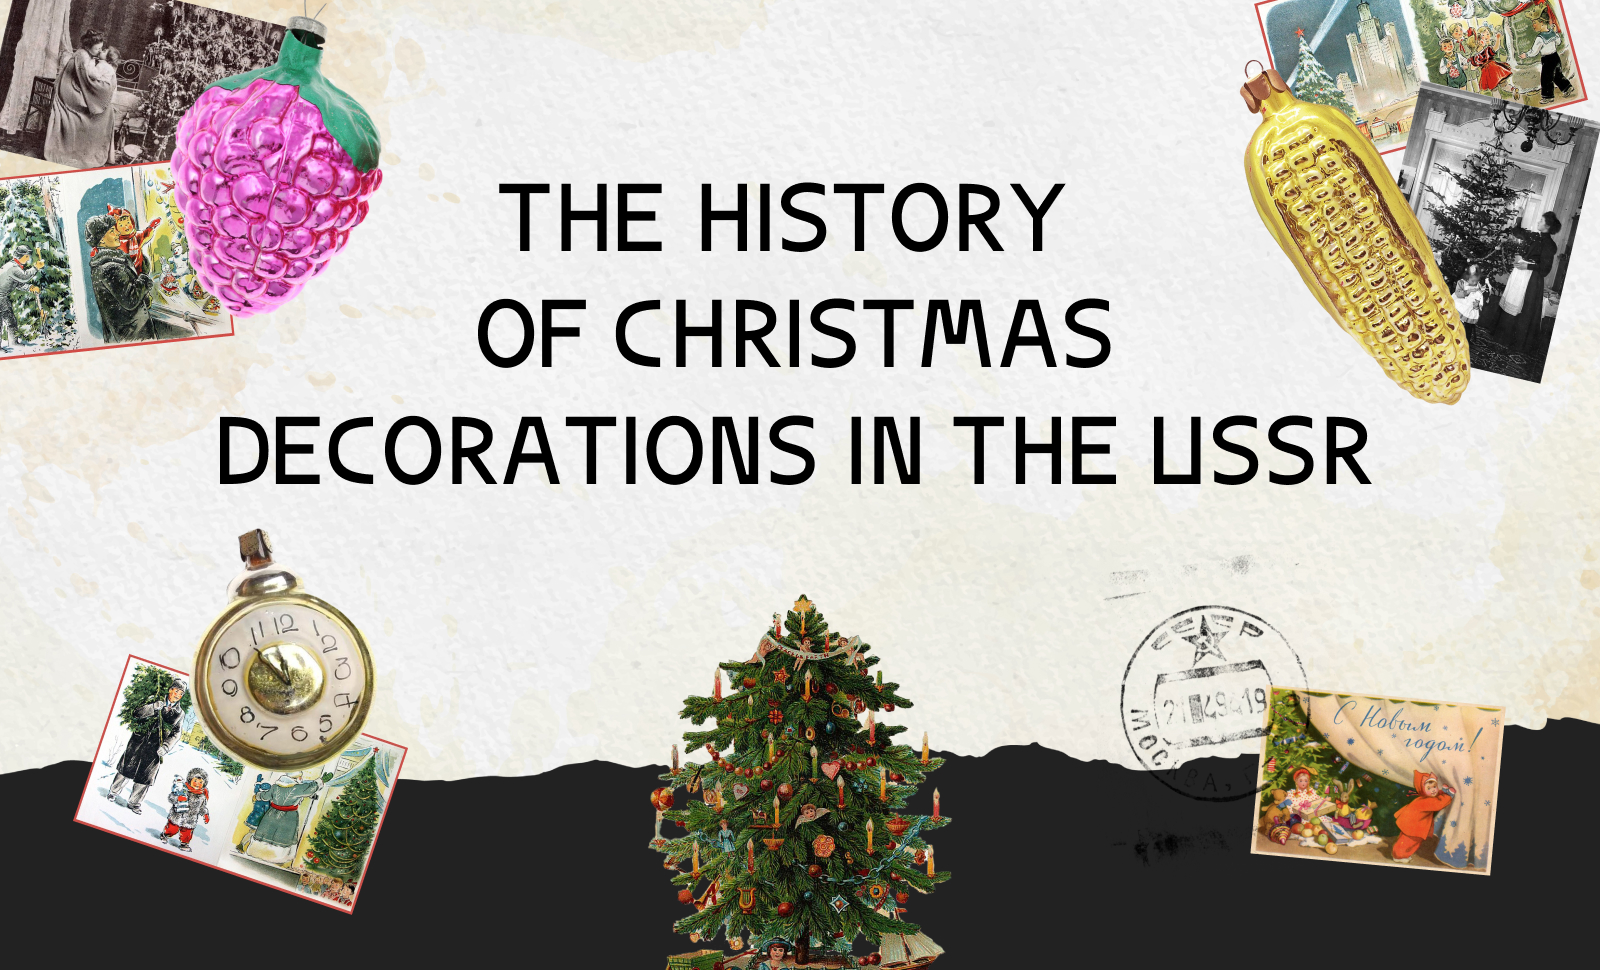 The history of Christmas decorations in the USSR